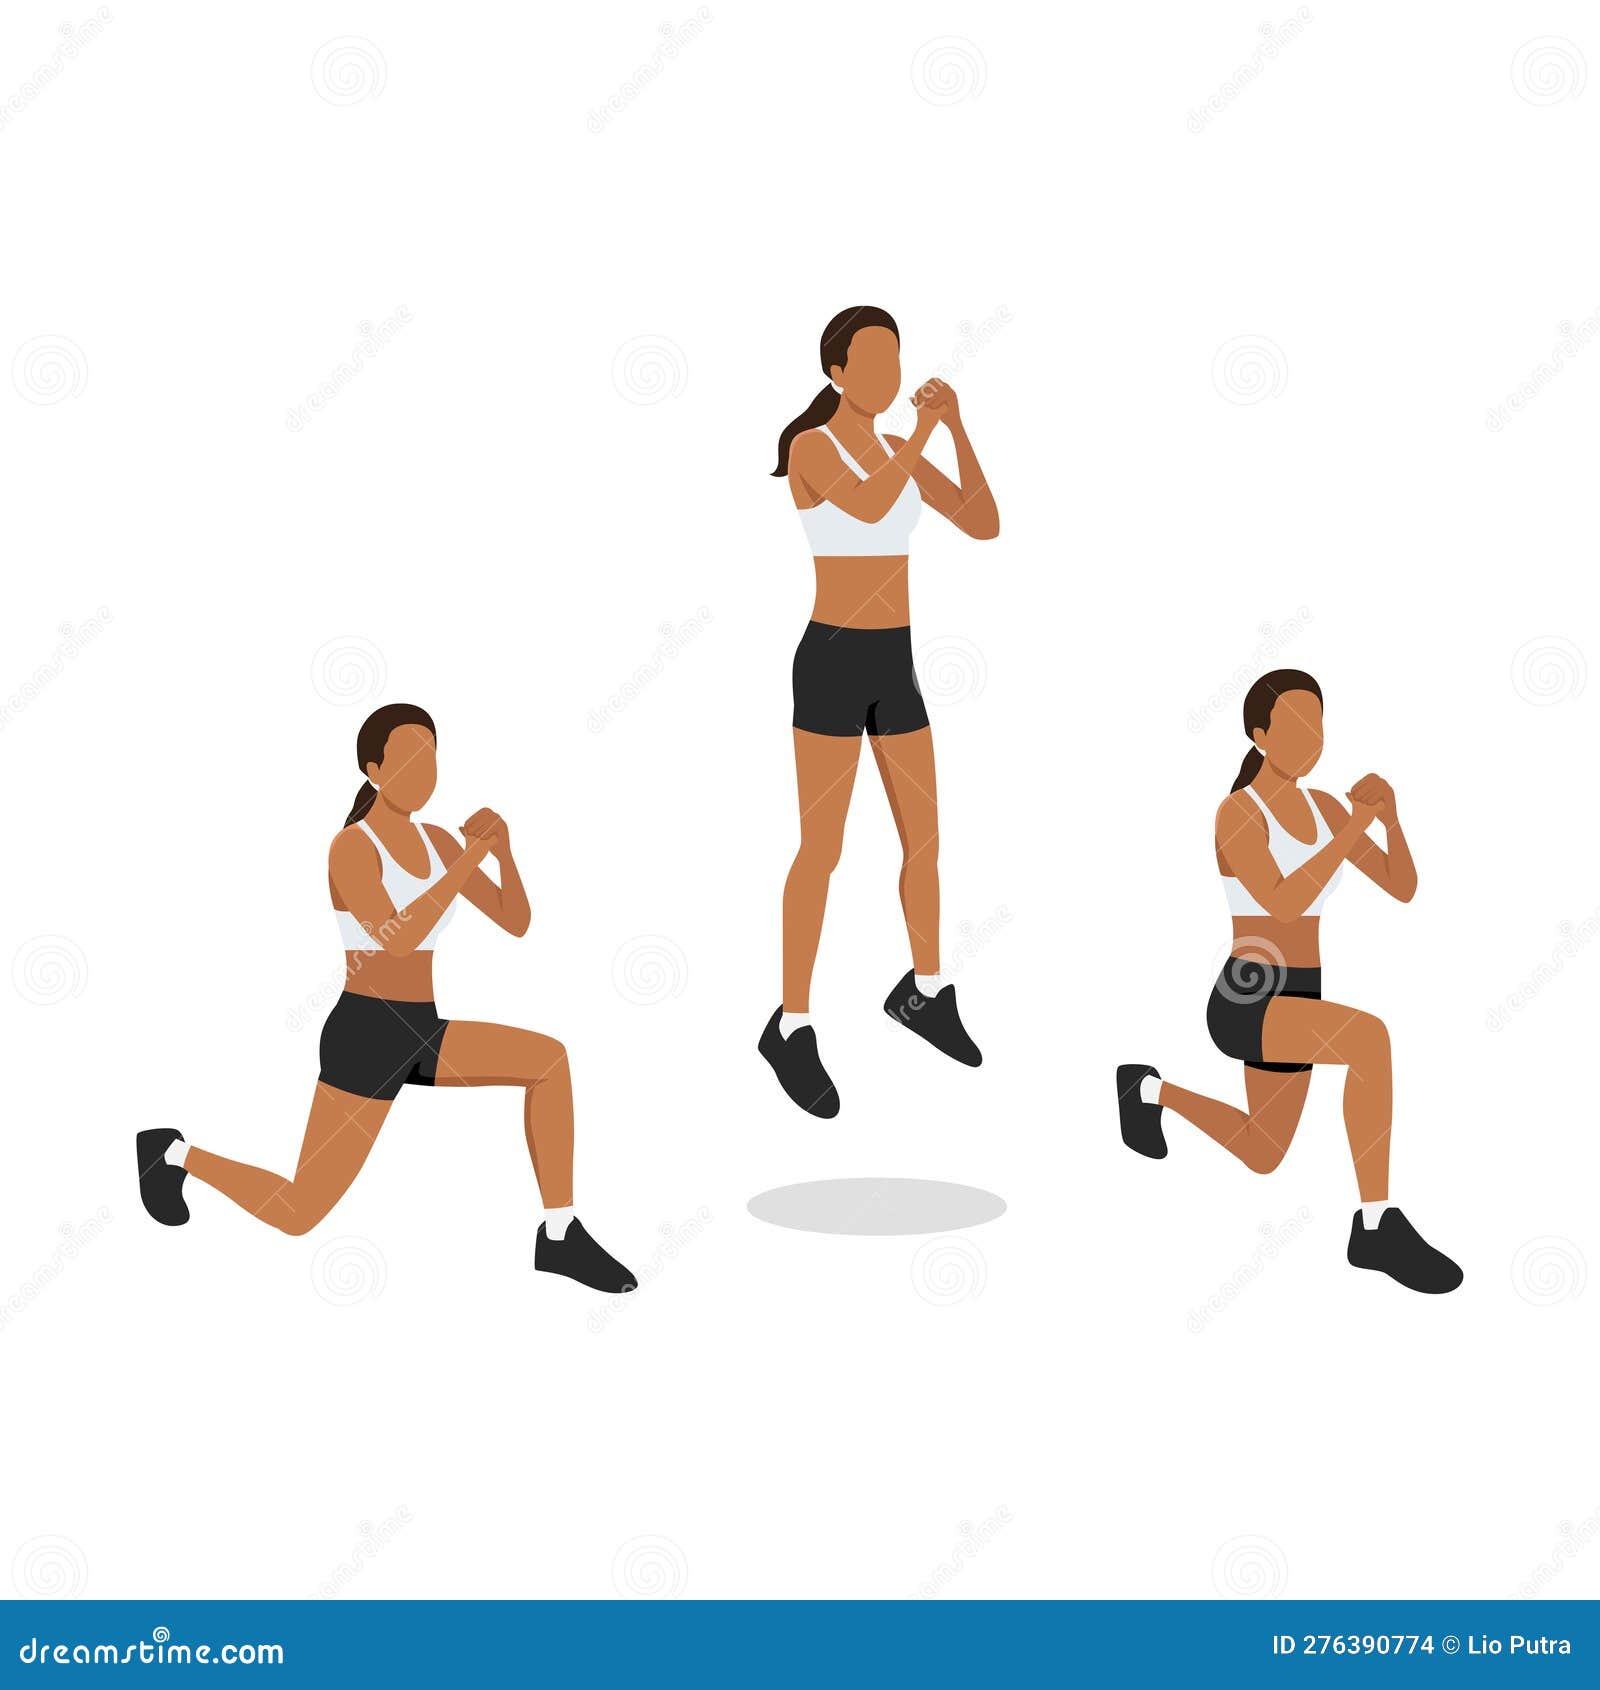 Woman Doing Explosive Jumping Alternating Lunges Exercise in 3 Steps ...